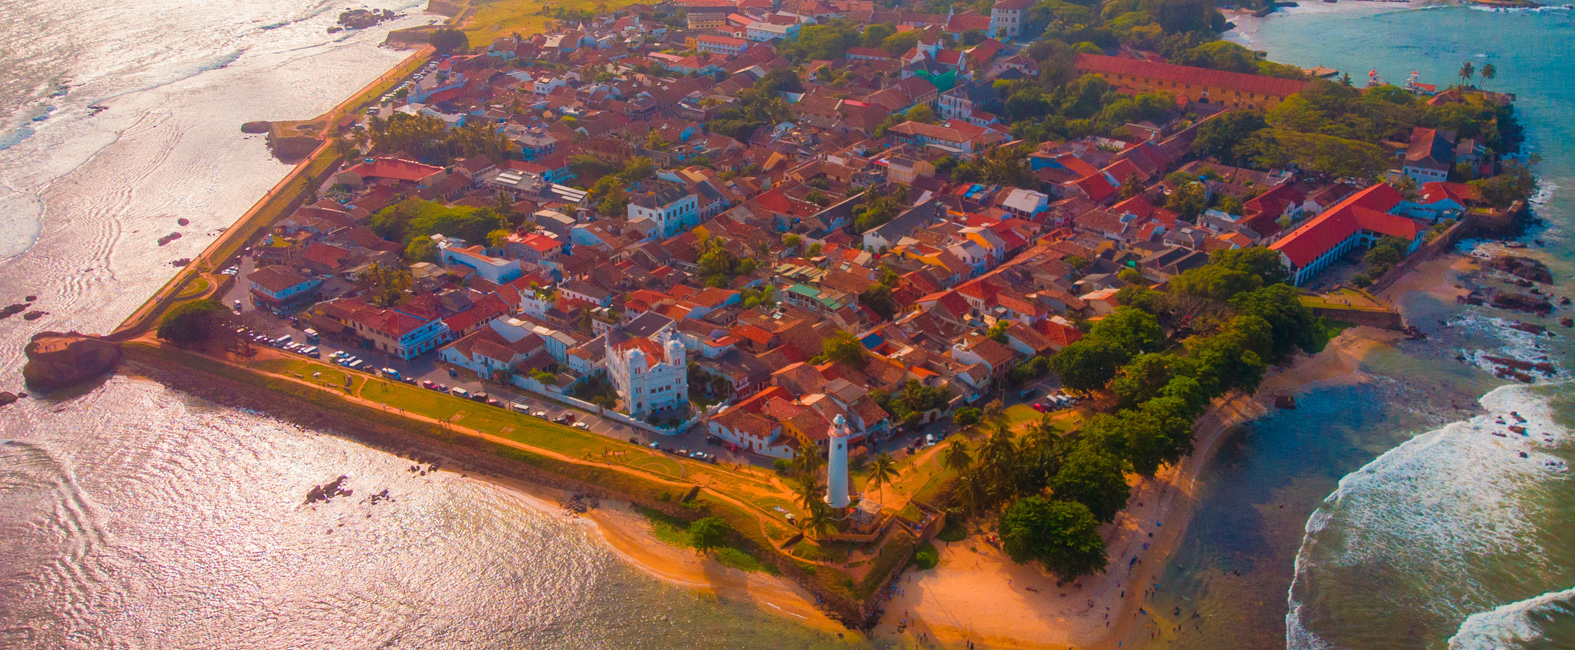 GALLE-FORT-DRONE-MAIN-IMAGE-KARUSAN-TRAVELS